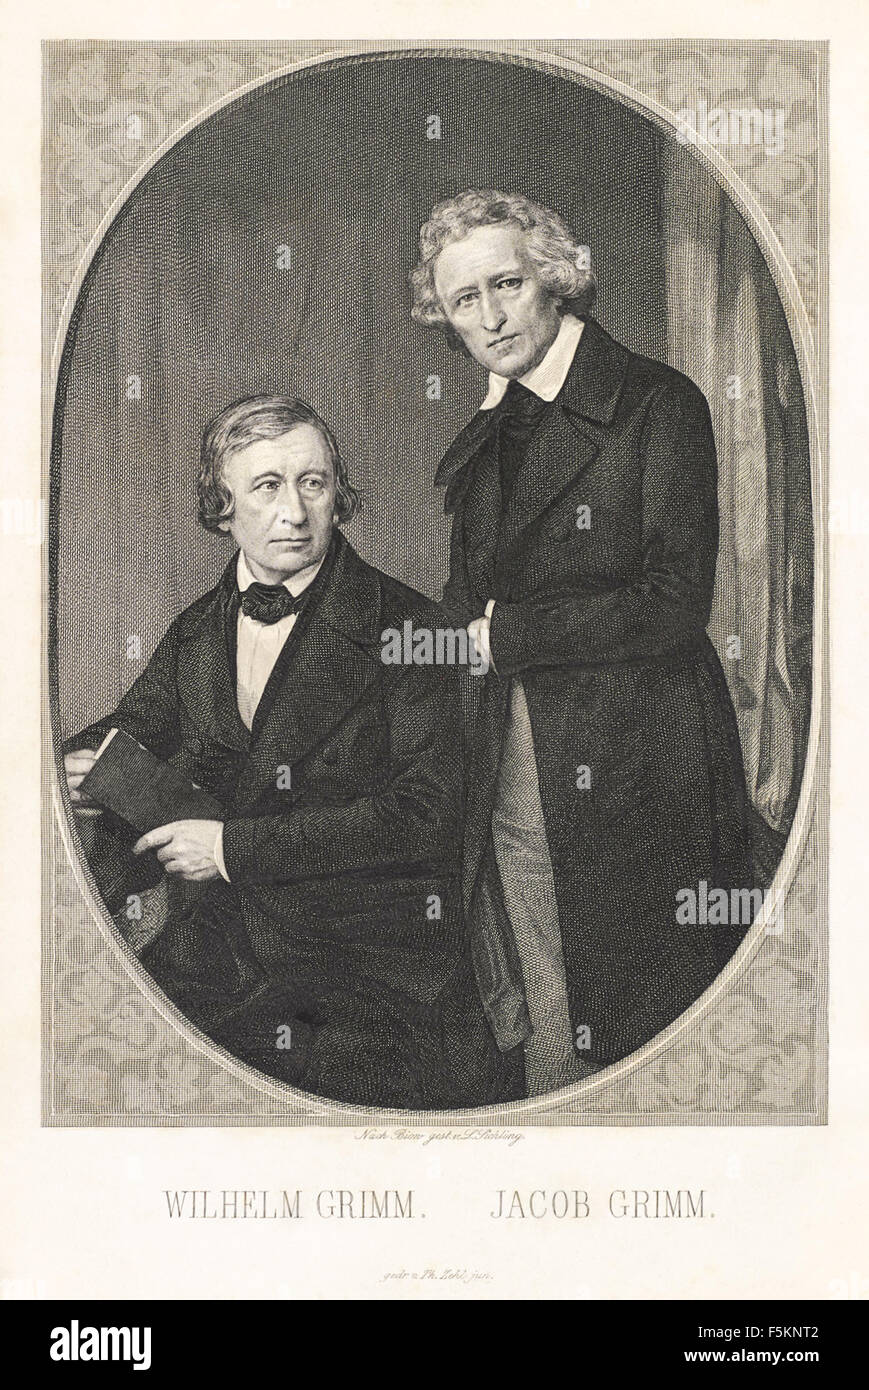 Portrait of the Brothers Grimm, Wilhelm Grim (1786-1859) seated, Jacob Grimm  (1785-1863) standing; steel engraving by Lazarus Gottlieb Sichling (1812-1863) from an early photograph taken in 1847. See description for more information. Stock Photo